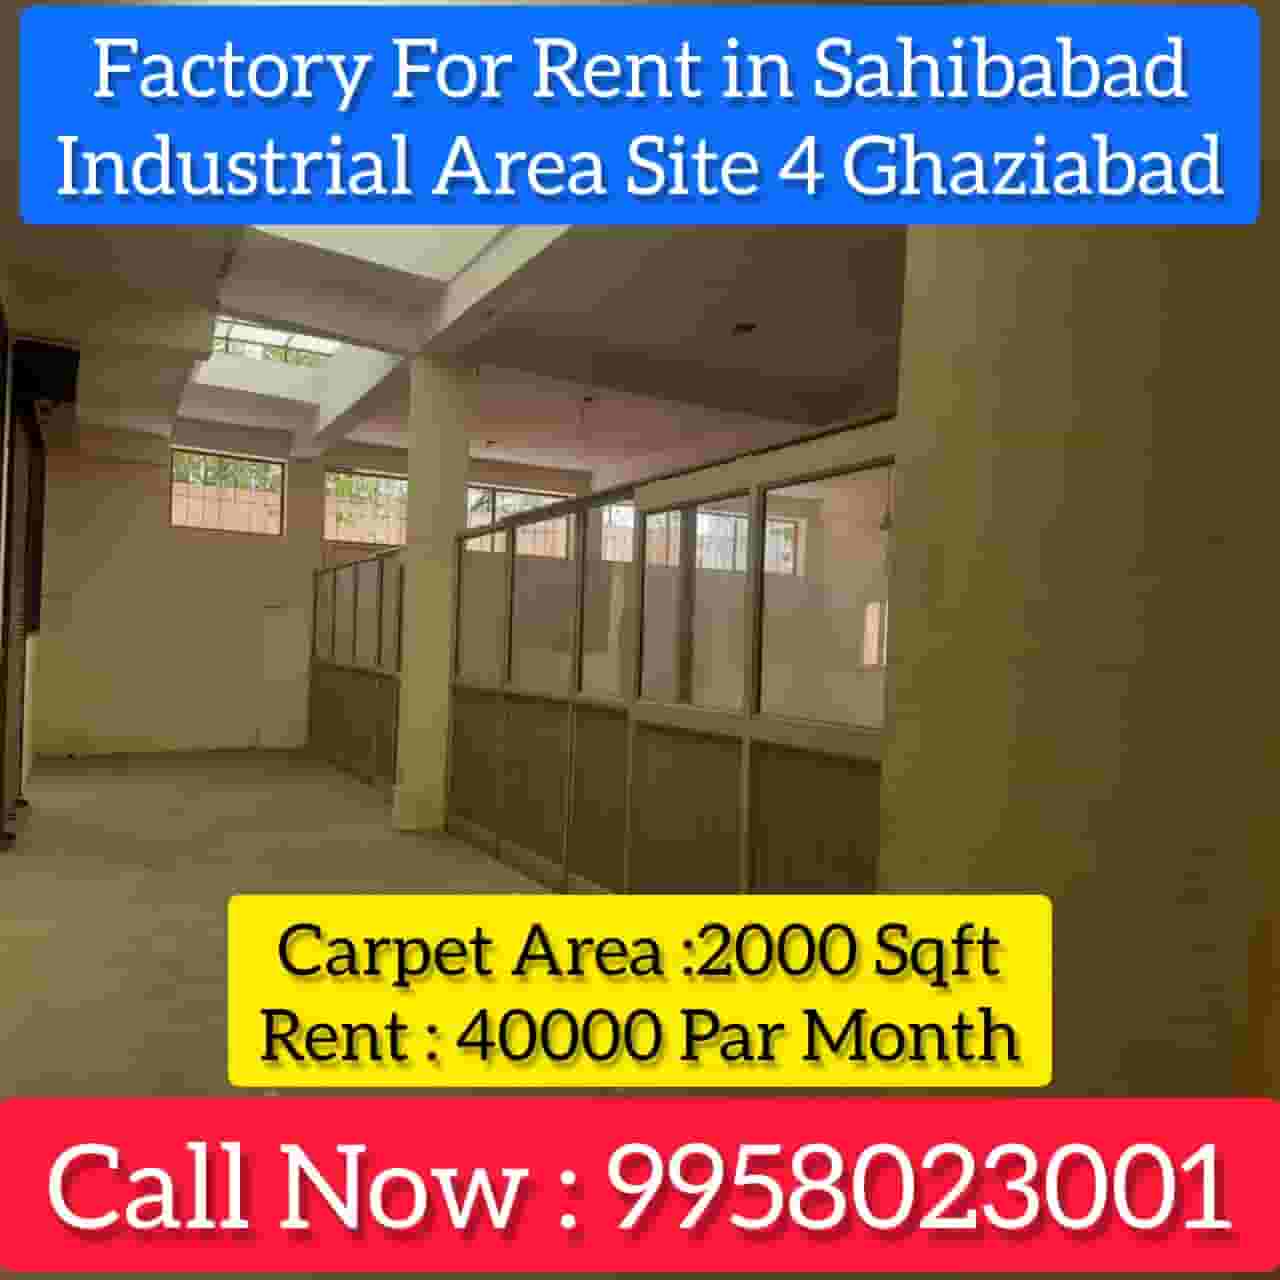 Factory for Rent in Sahibabad Industrial Area 